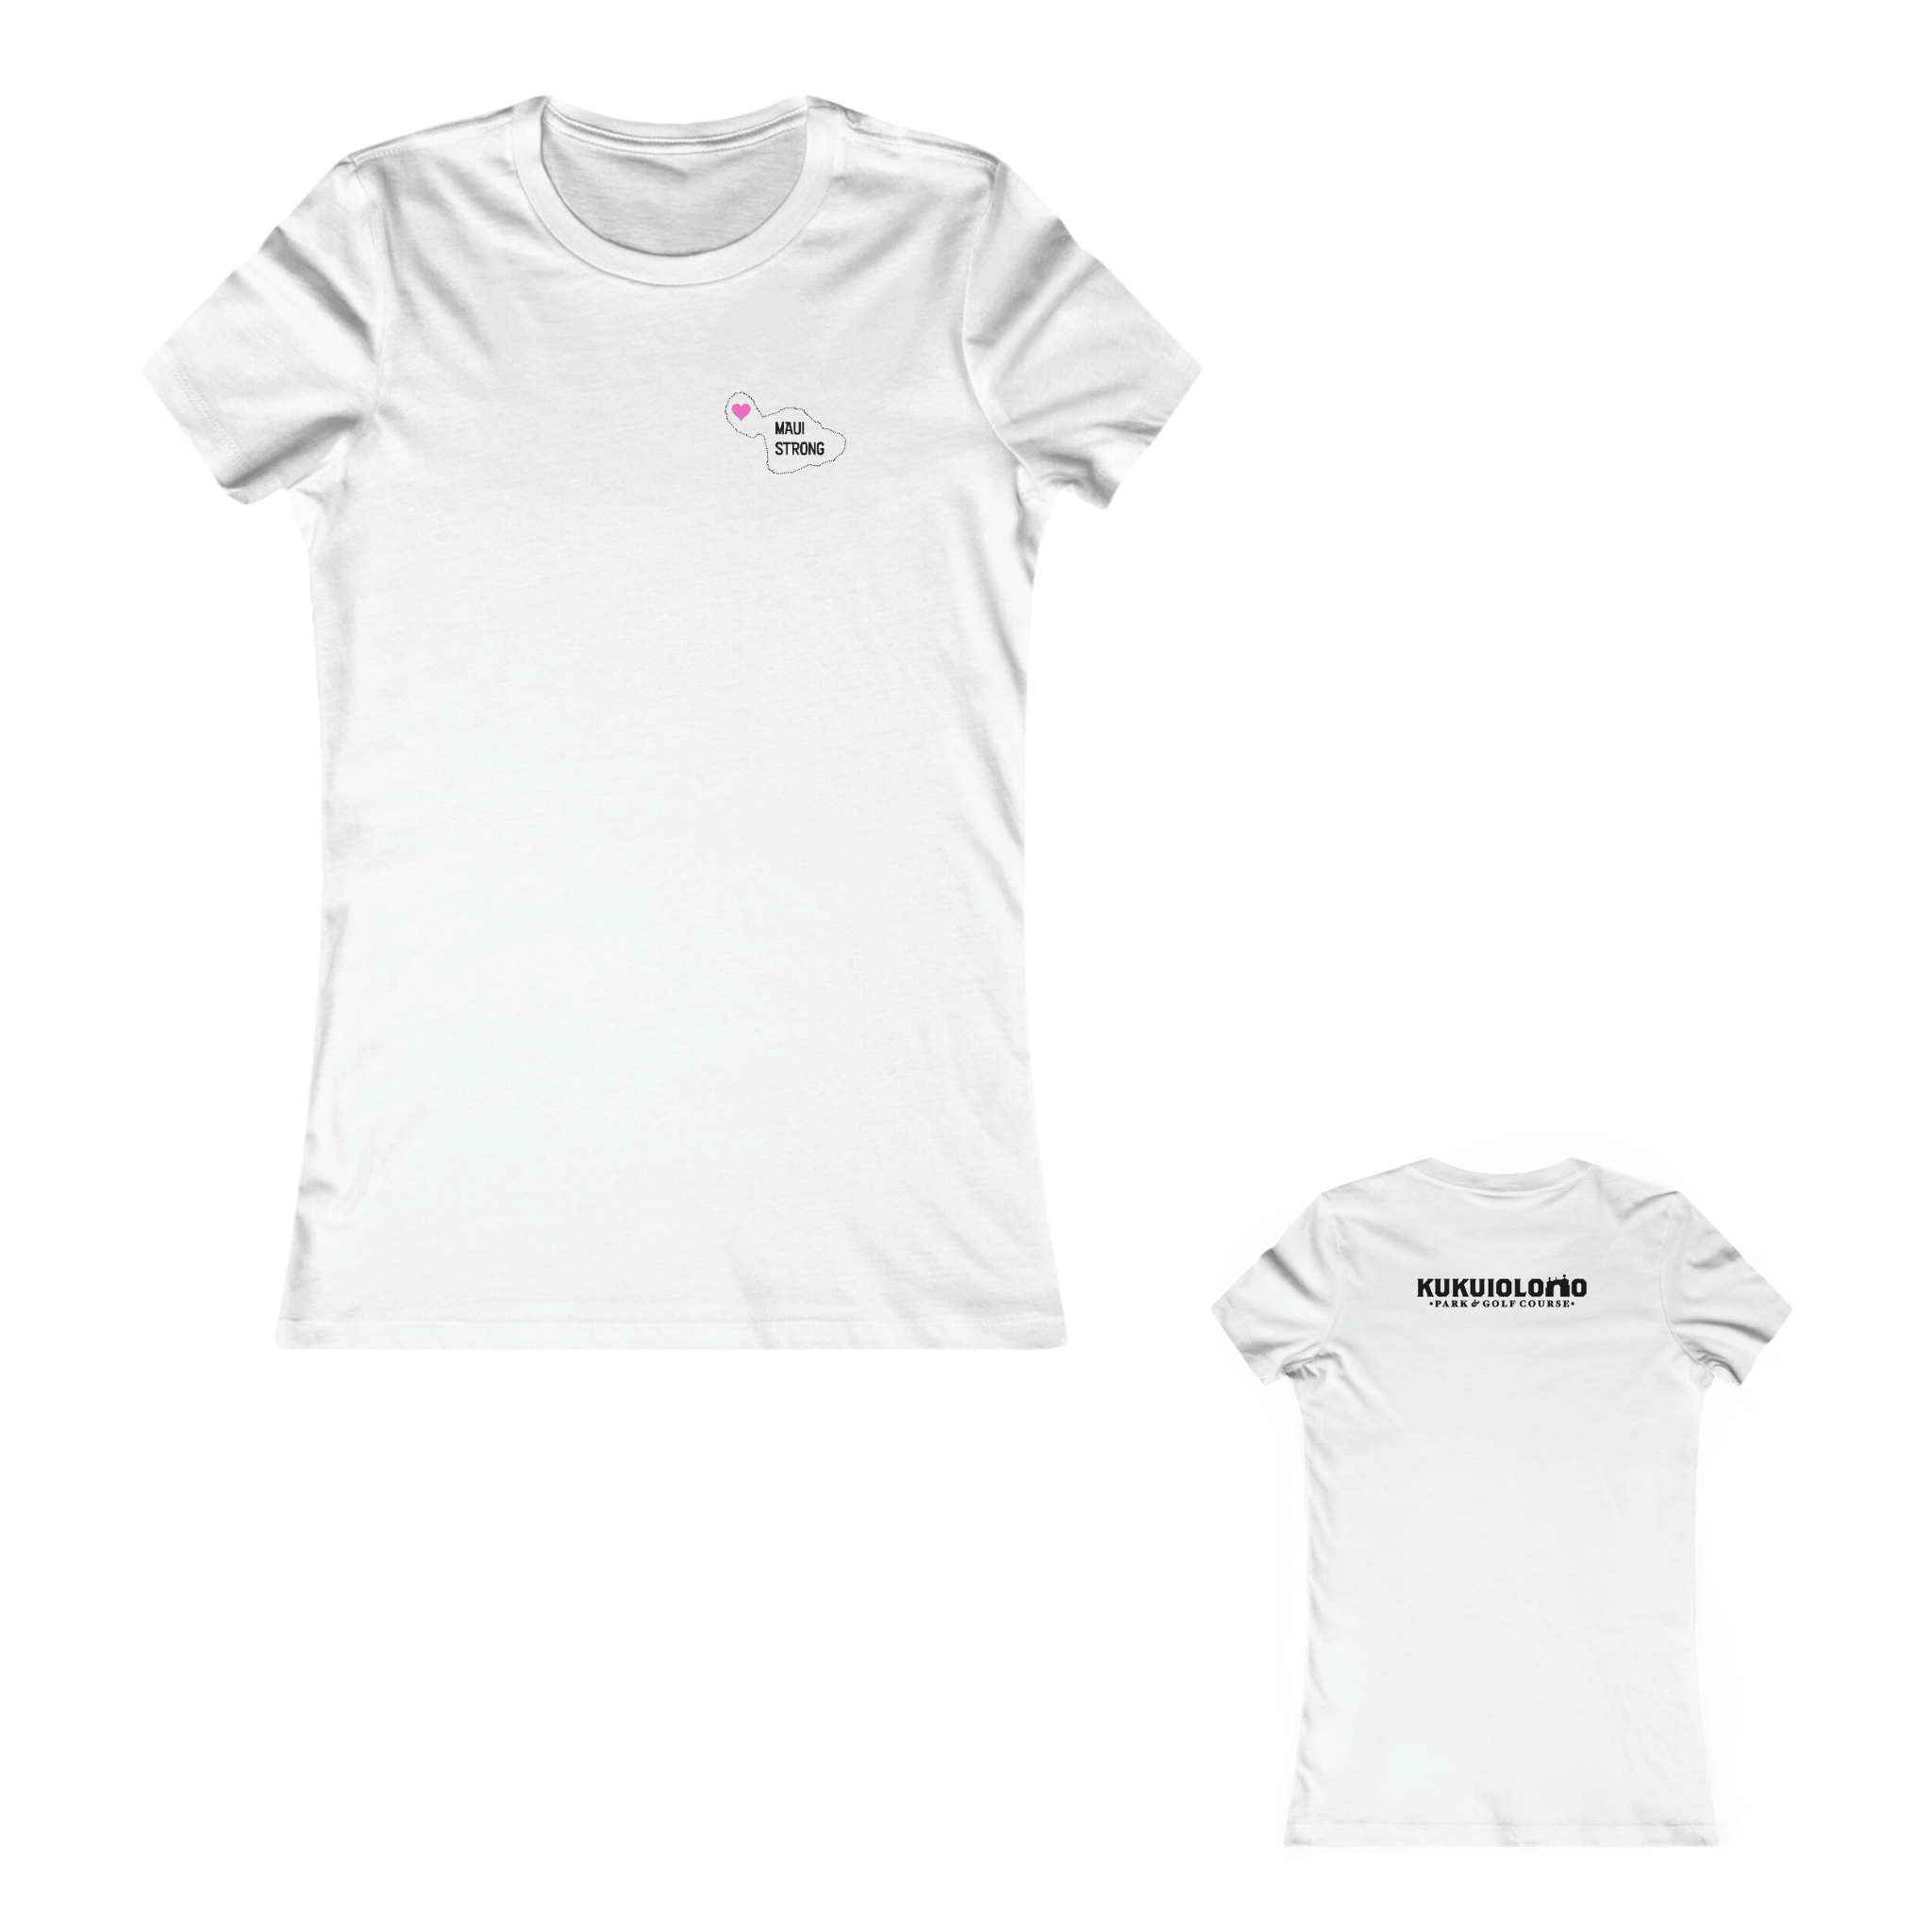 Women's Slim Fit Tee - Maui Strong + Kukuiolono Park and Golf Course